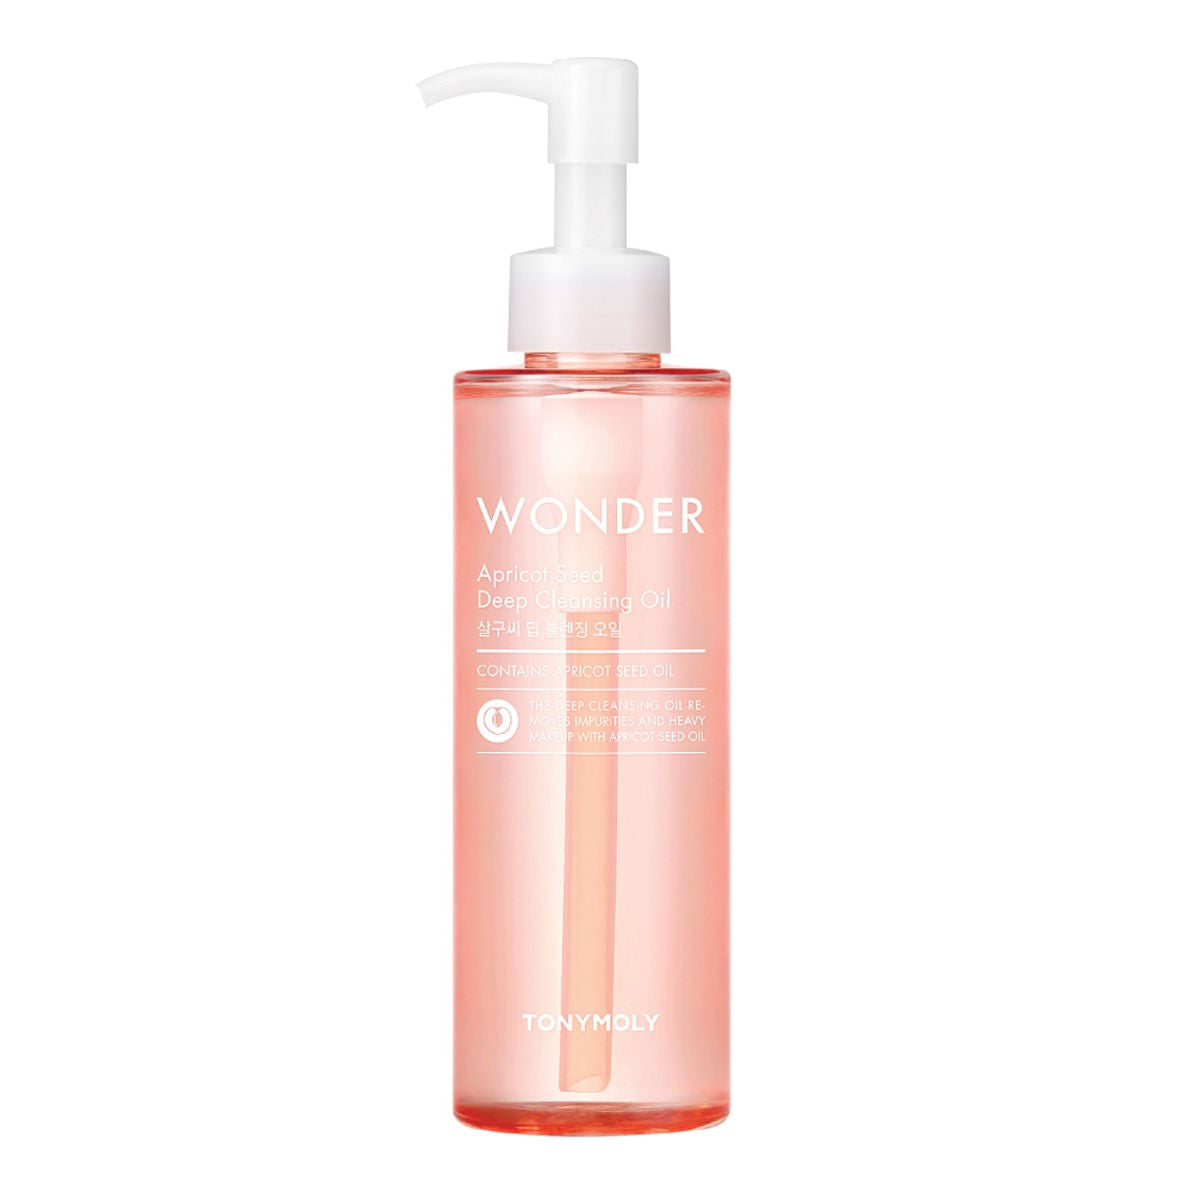 Tony Moly Wonder Apricot Deep Cleansing